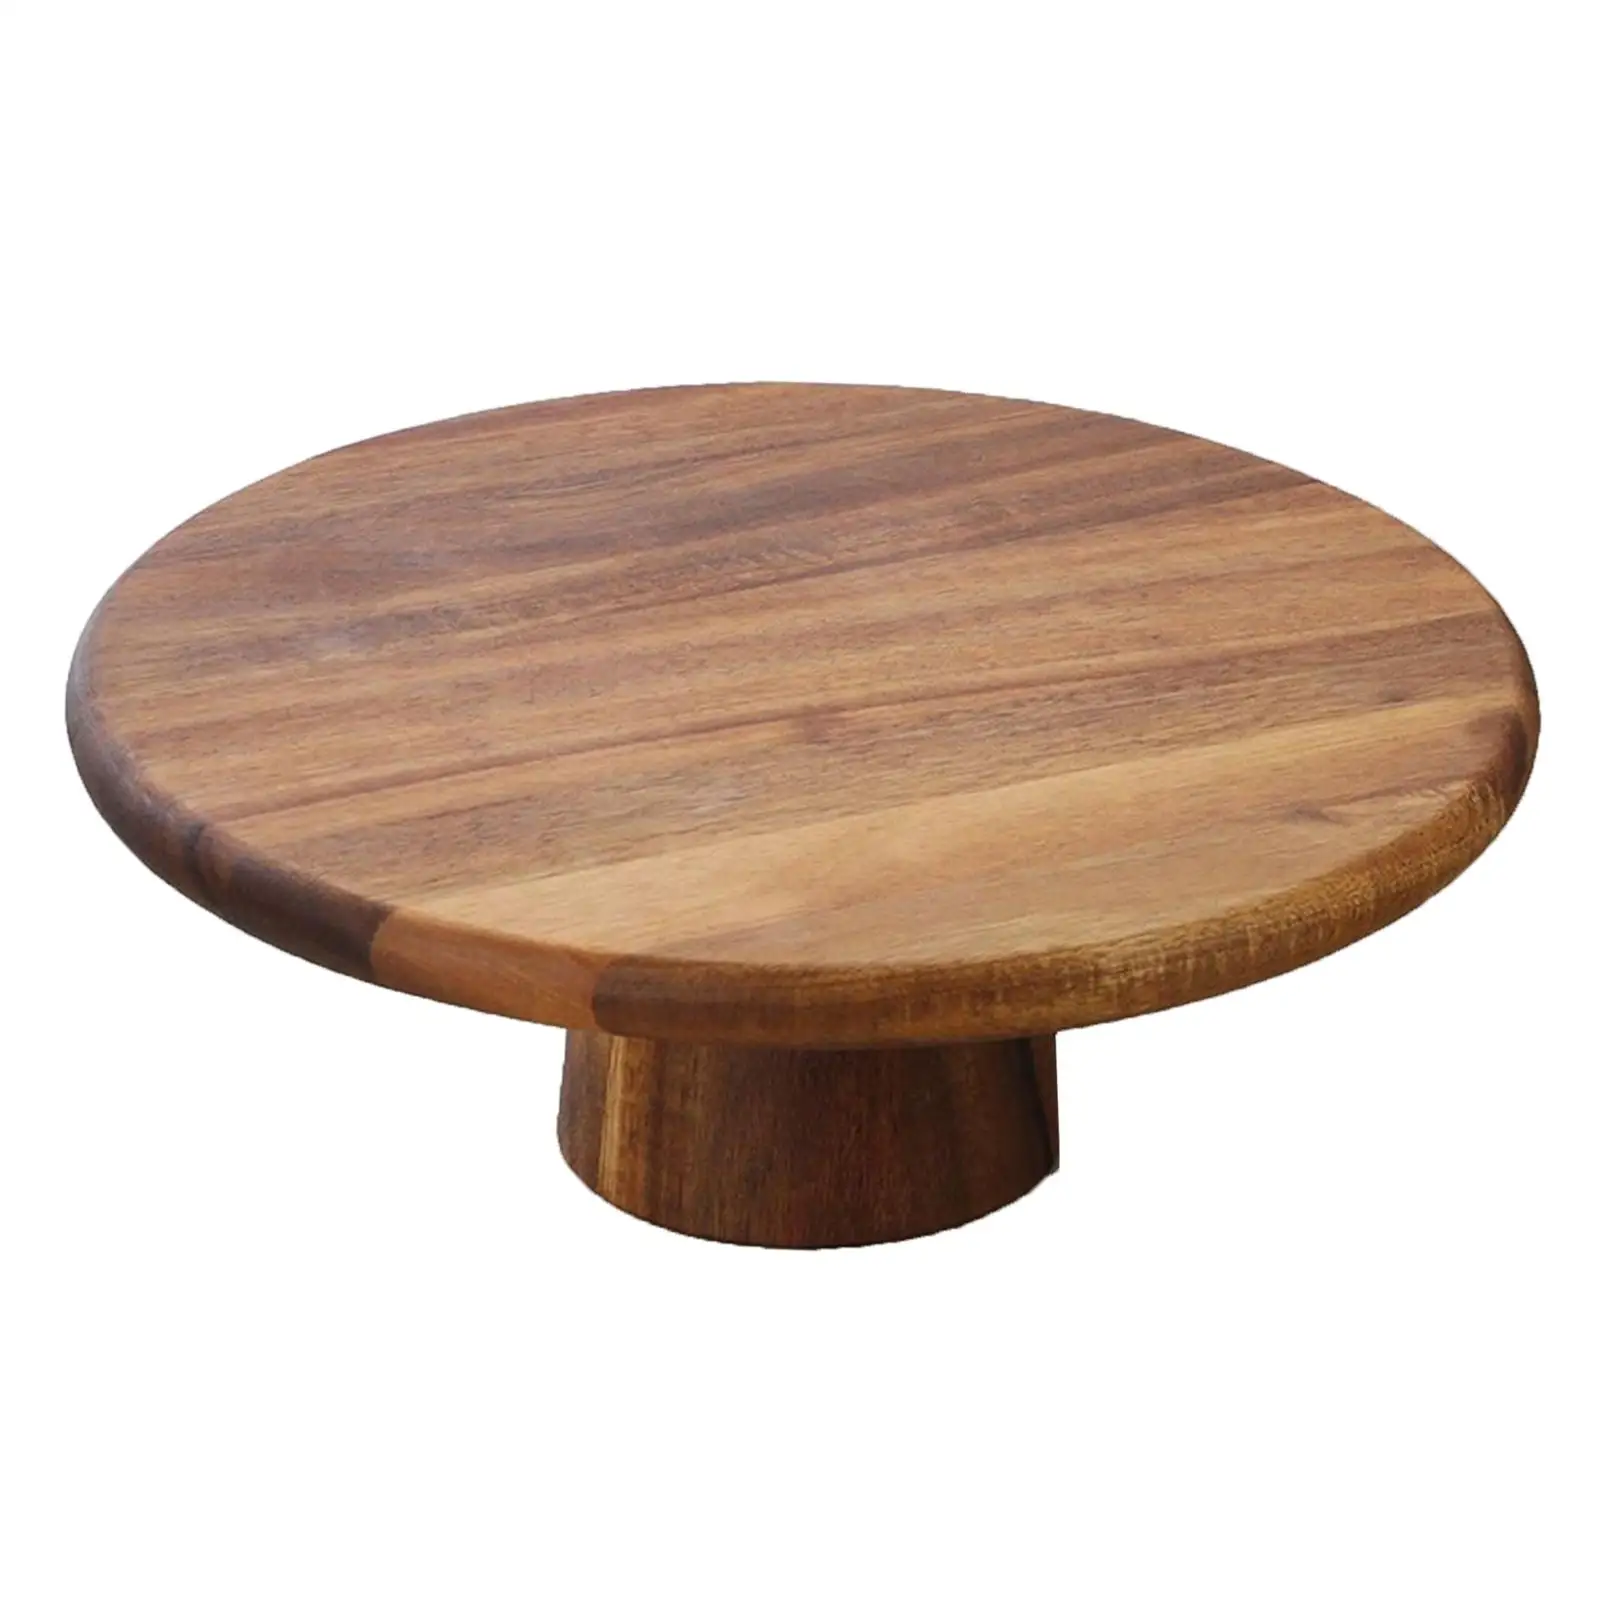 Wood Cake Stand Kitchen Server Tray High Pedestal Serving Tray Multifunctional